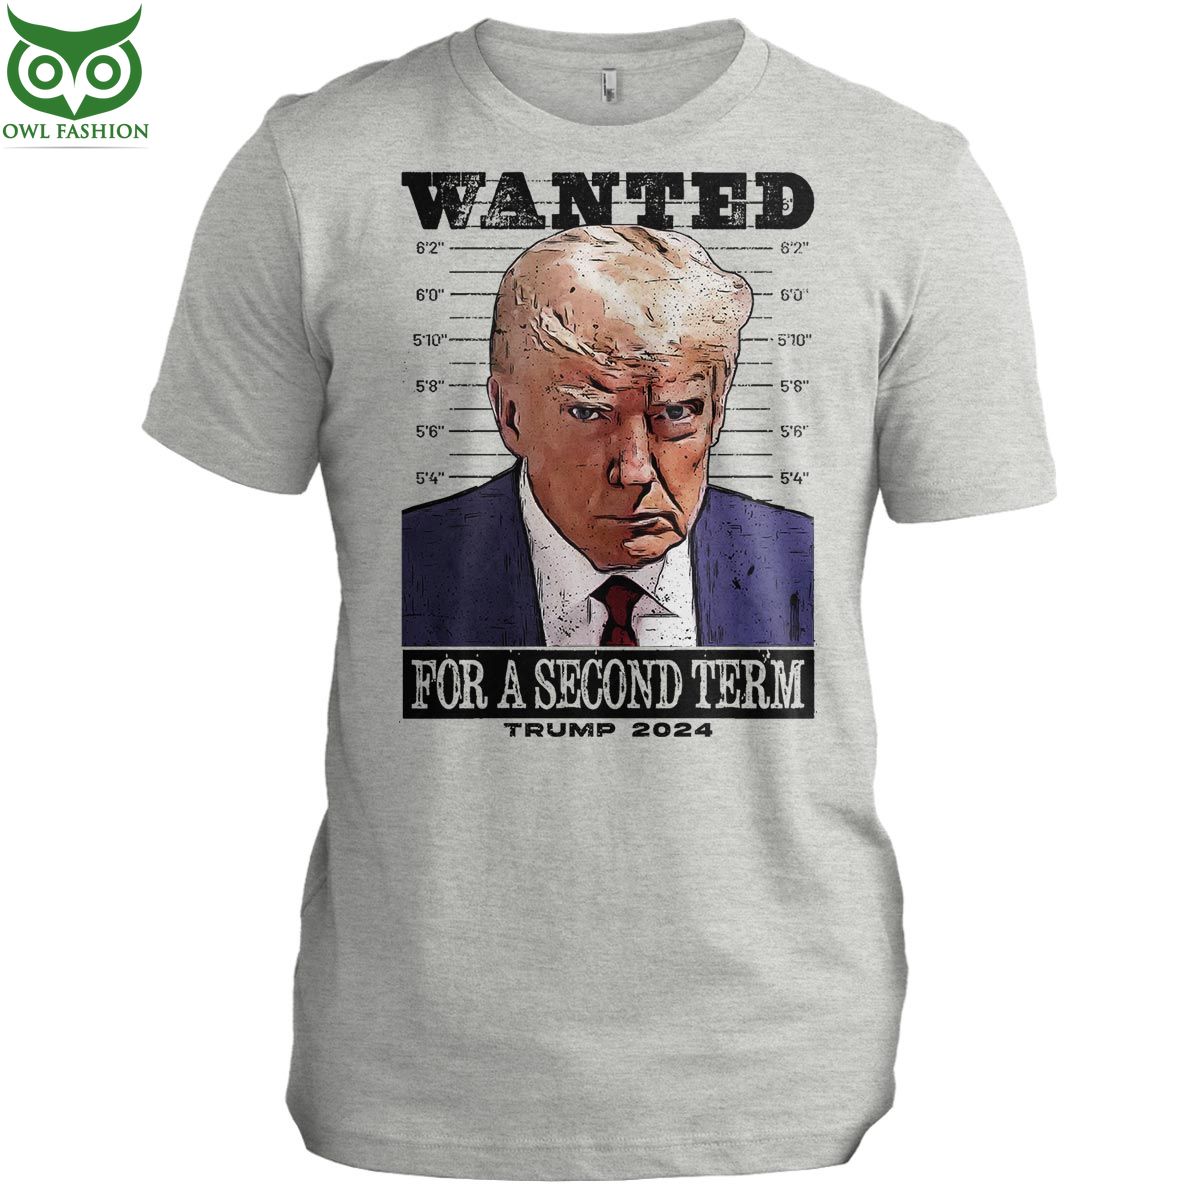 Trump 2024 Wanted For A Second Term 2D T-shirt